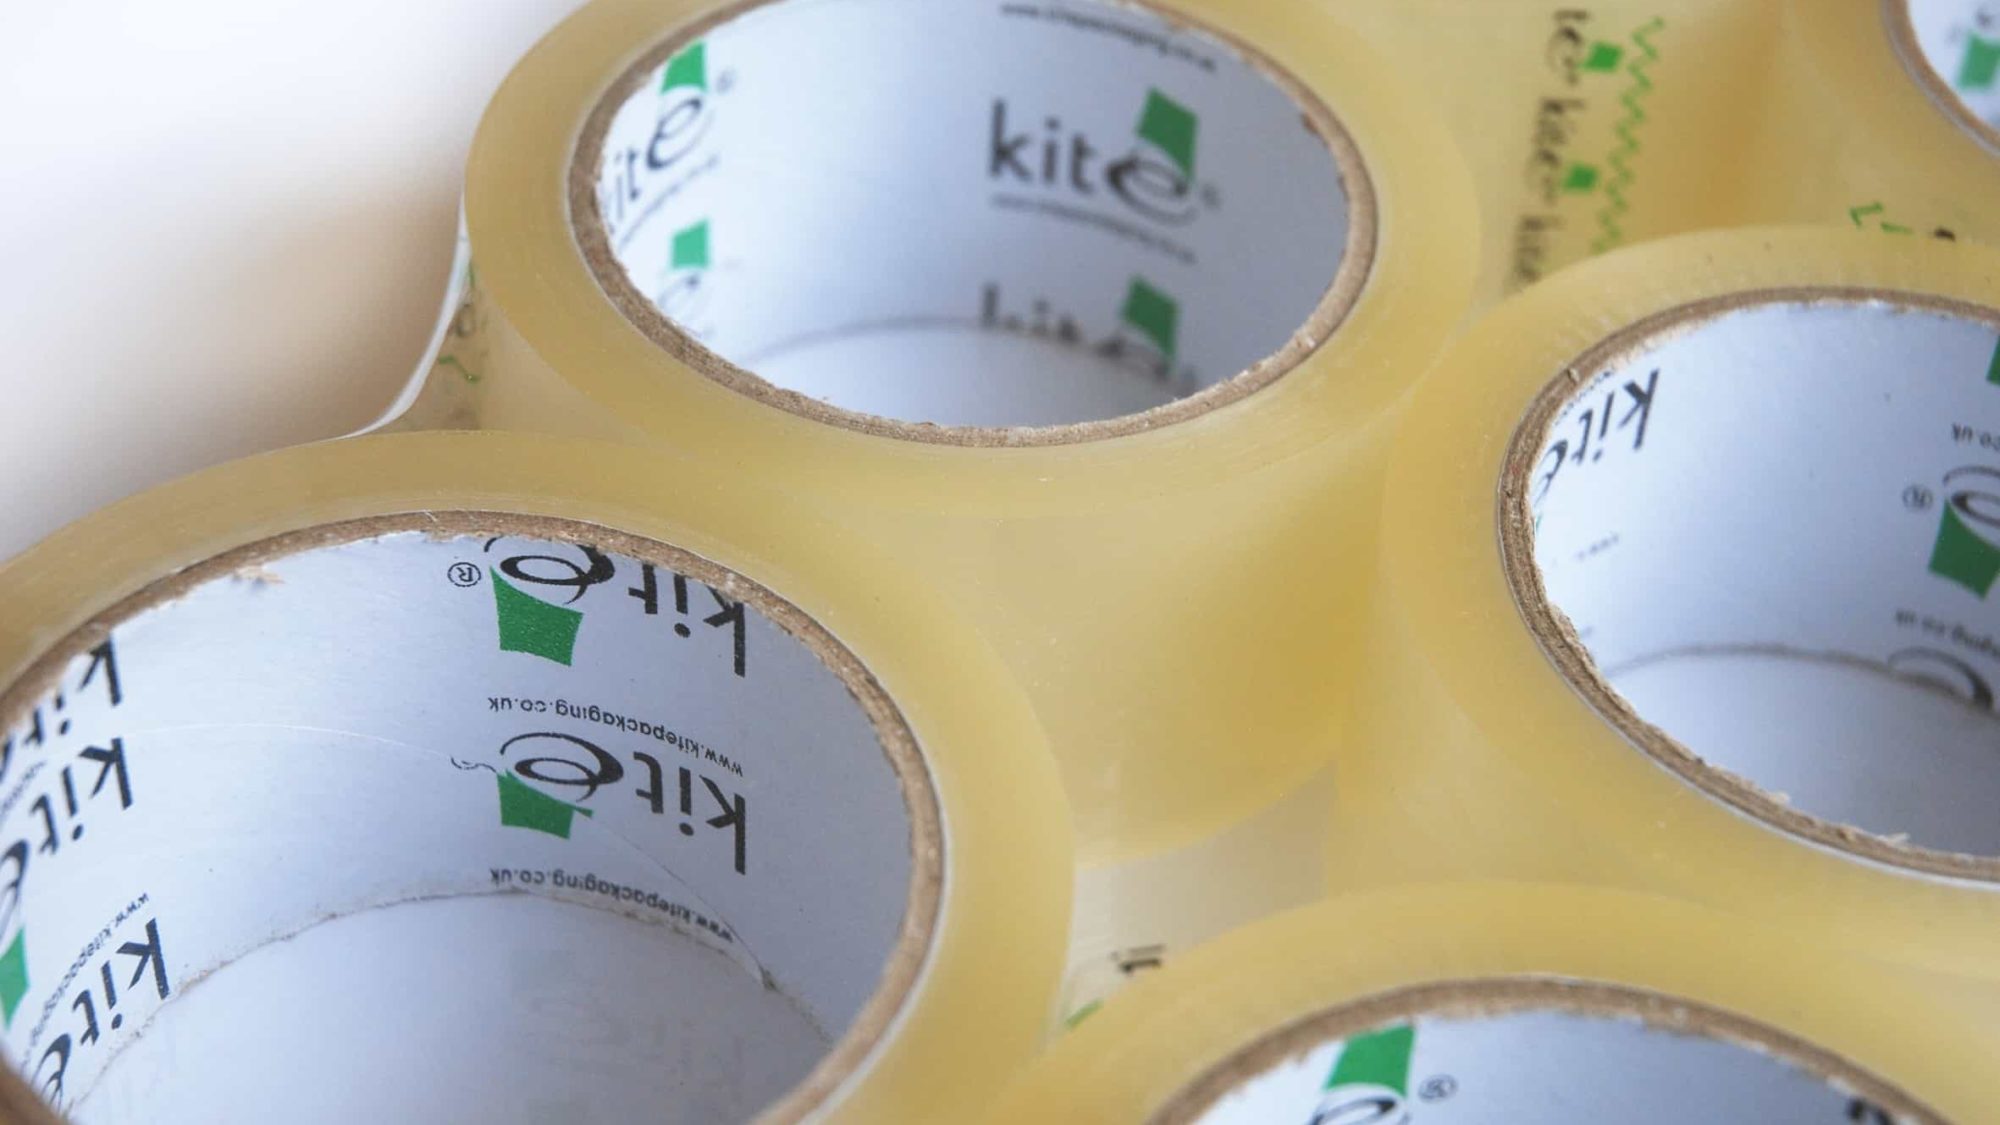 Kites Acrylic tape now sold in retail packs of 6